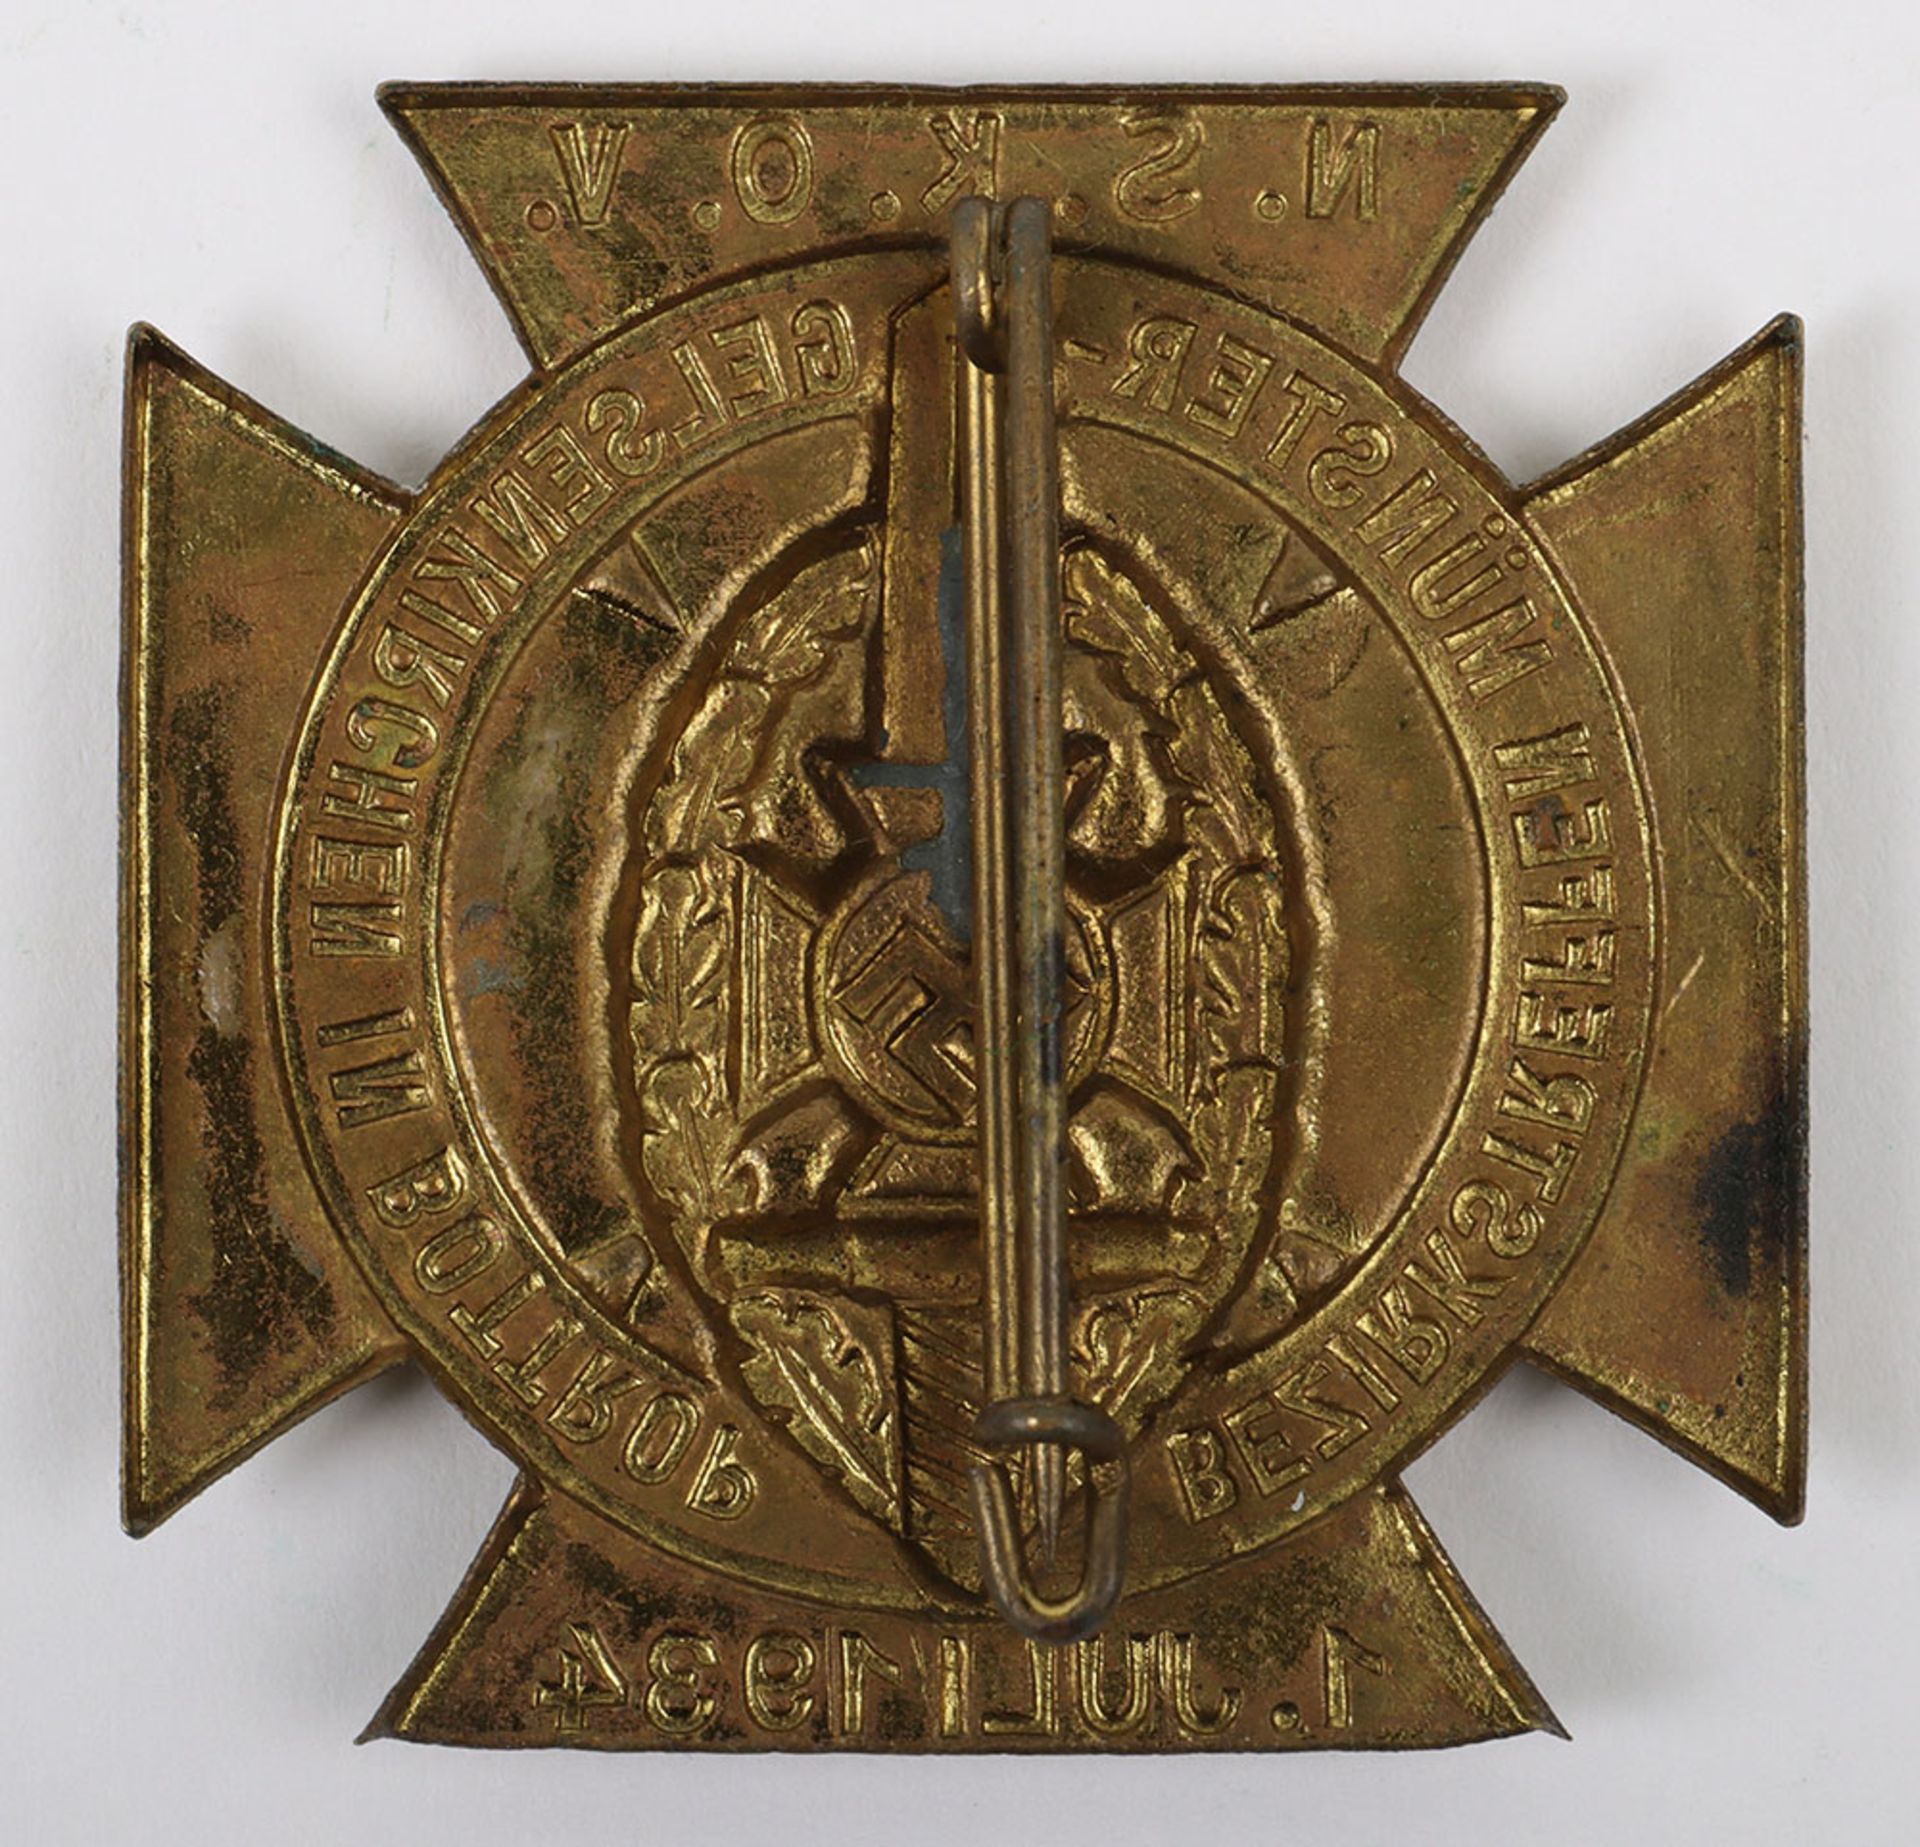 Third Reich N.S.K.O.V 1934 Day Badge - Image 3 of 3